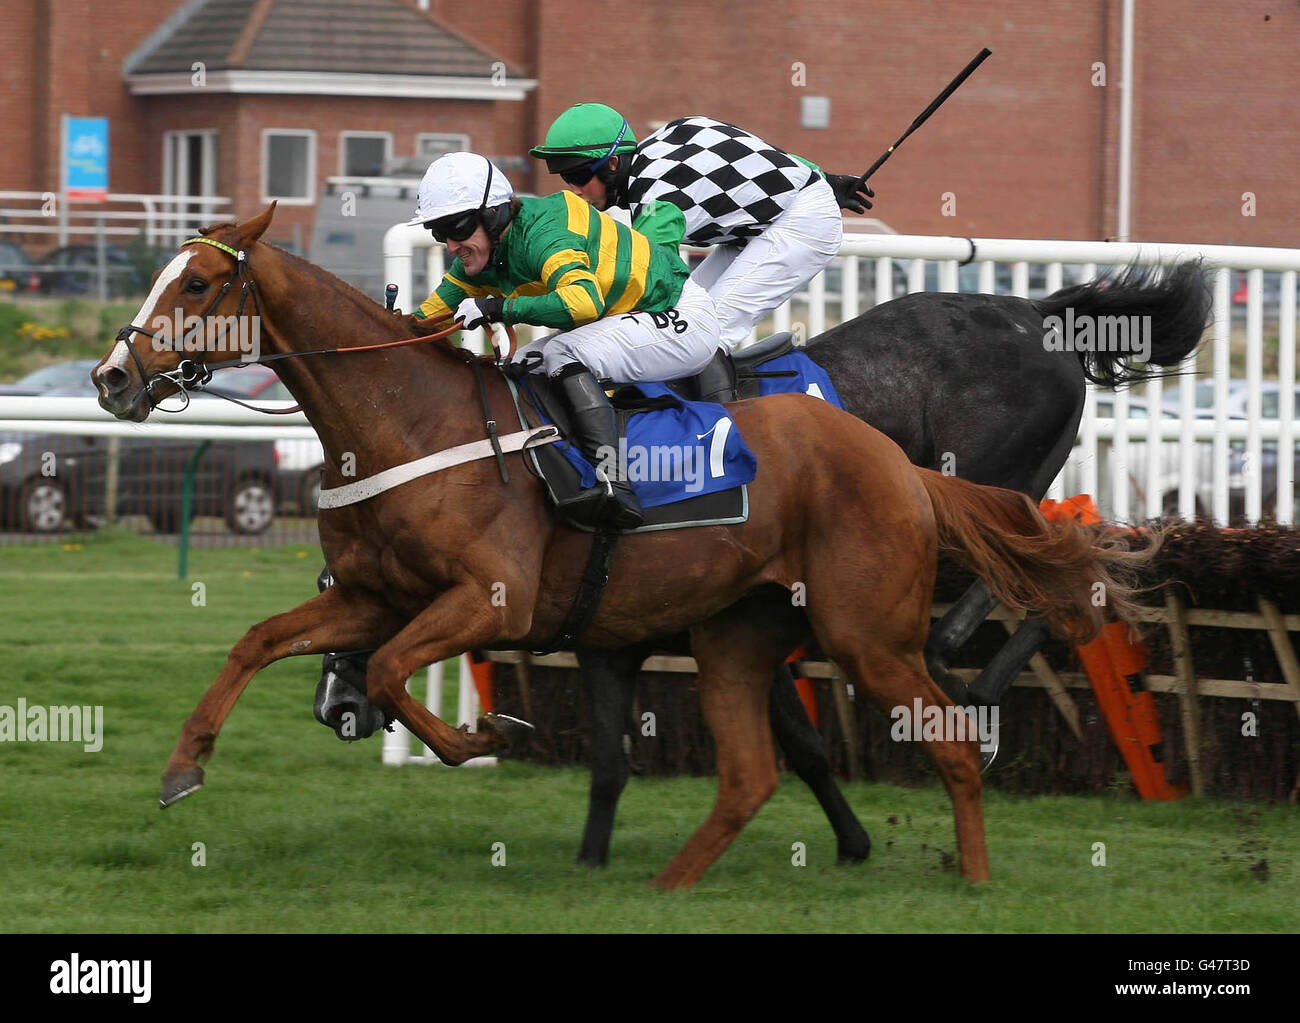 RememberNow ridden by Tony McCoy wins The Tam O'Shanter Poppyscotland Handicap Hurdle Race during day one of the Coral Scottish Grand National Festival at Ayr Racecourse. Stock Photo